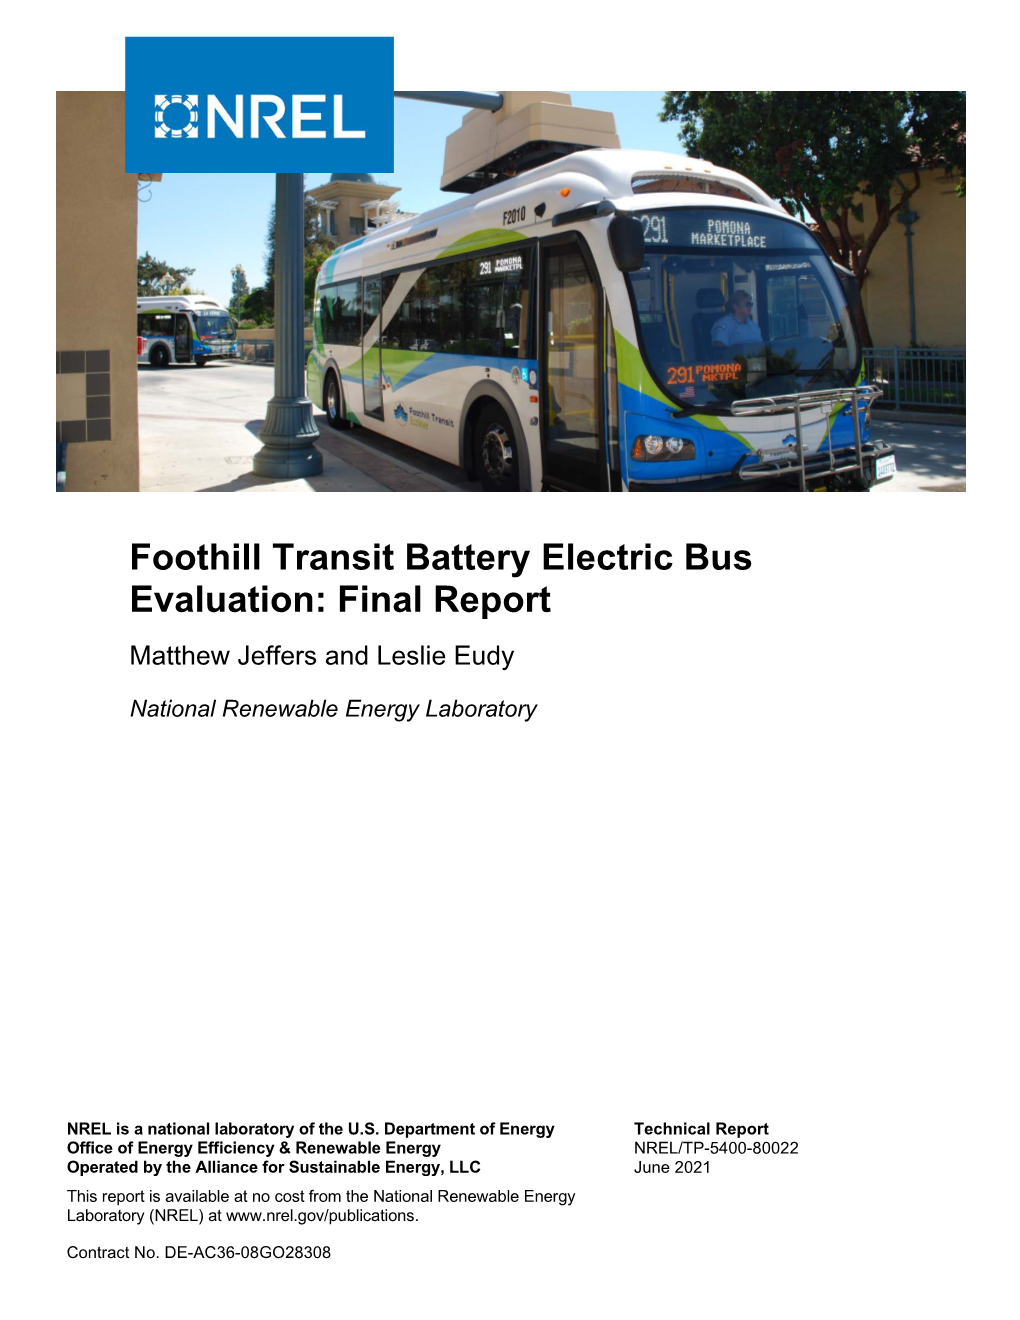 Foothill Transit Battery Electric Bus Evaluation: Final Report